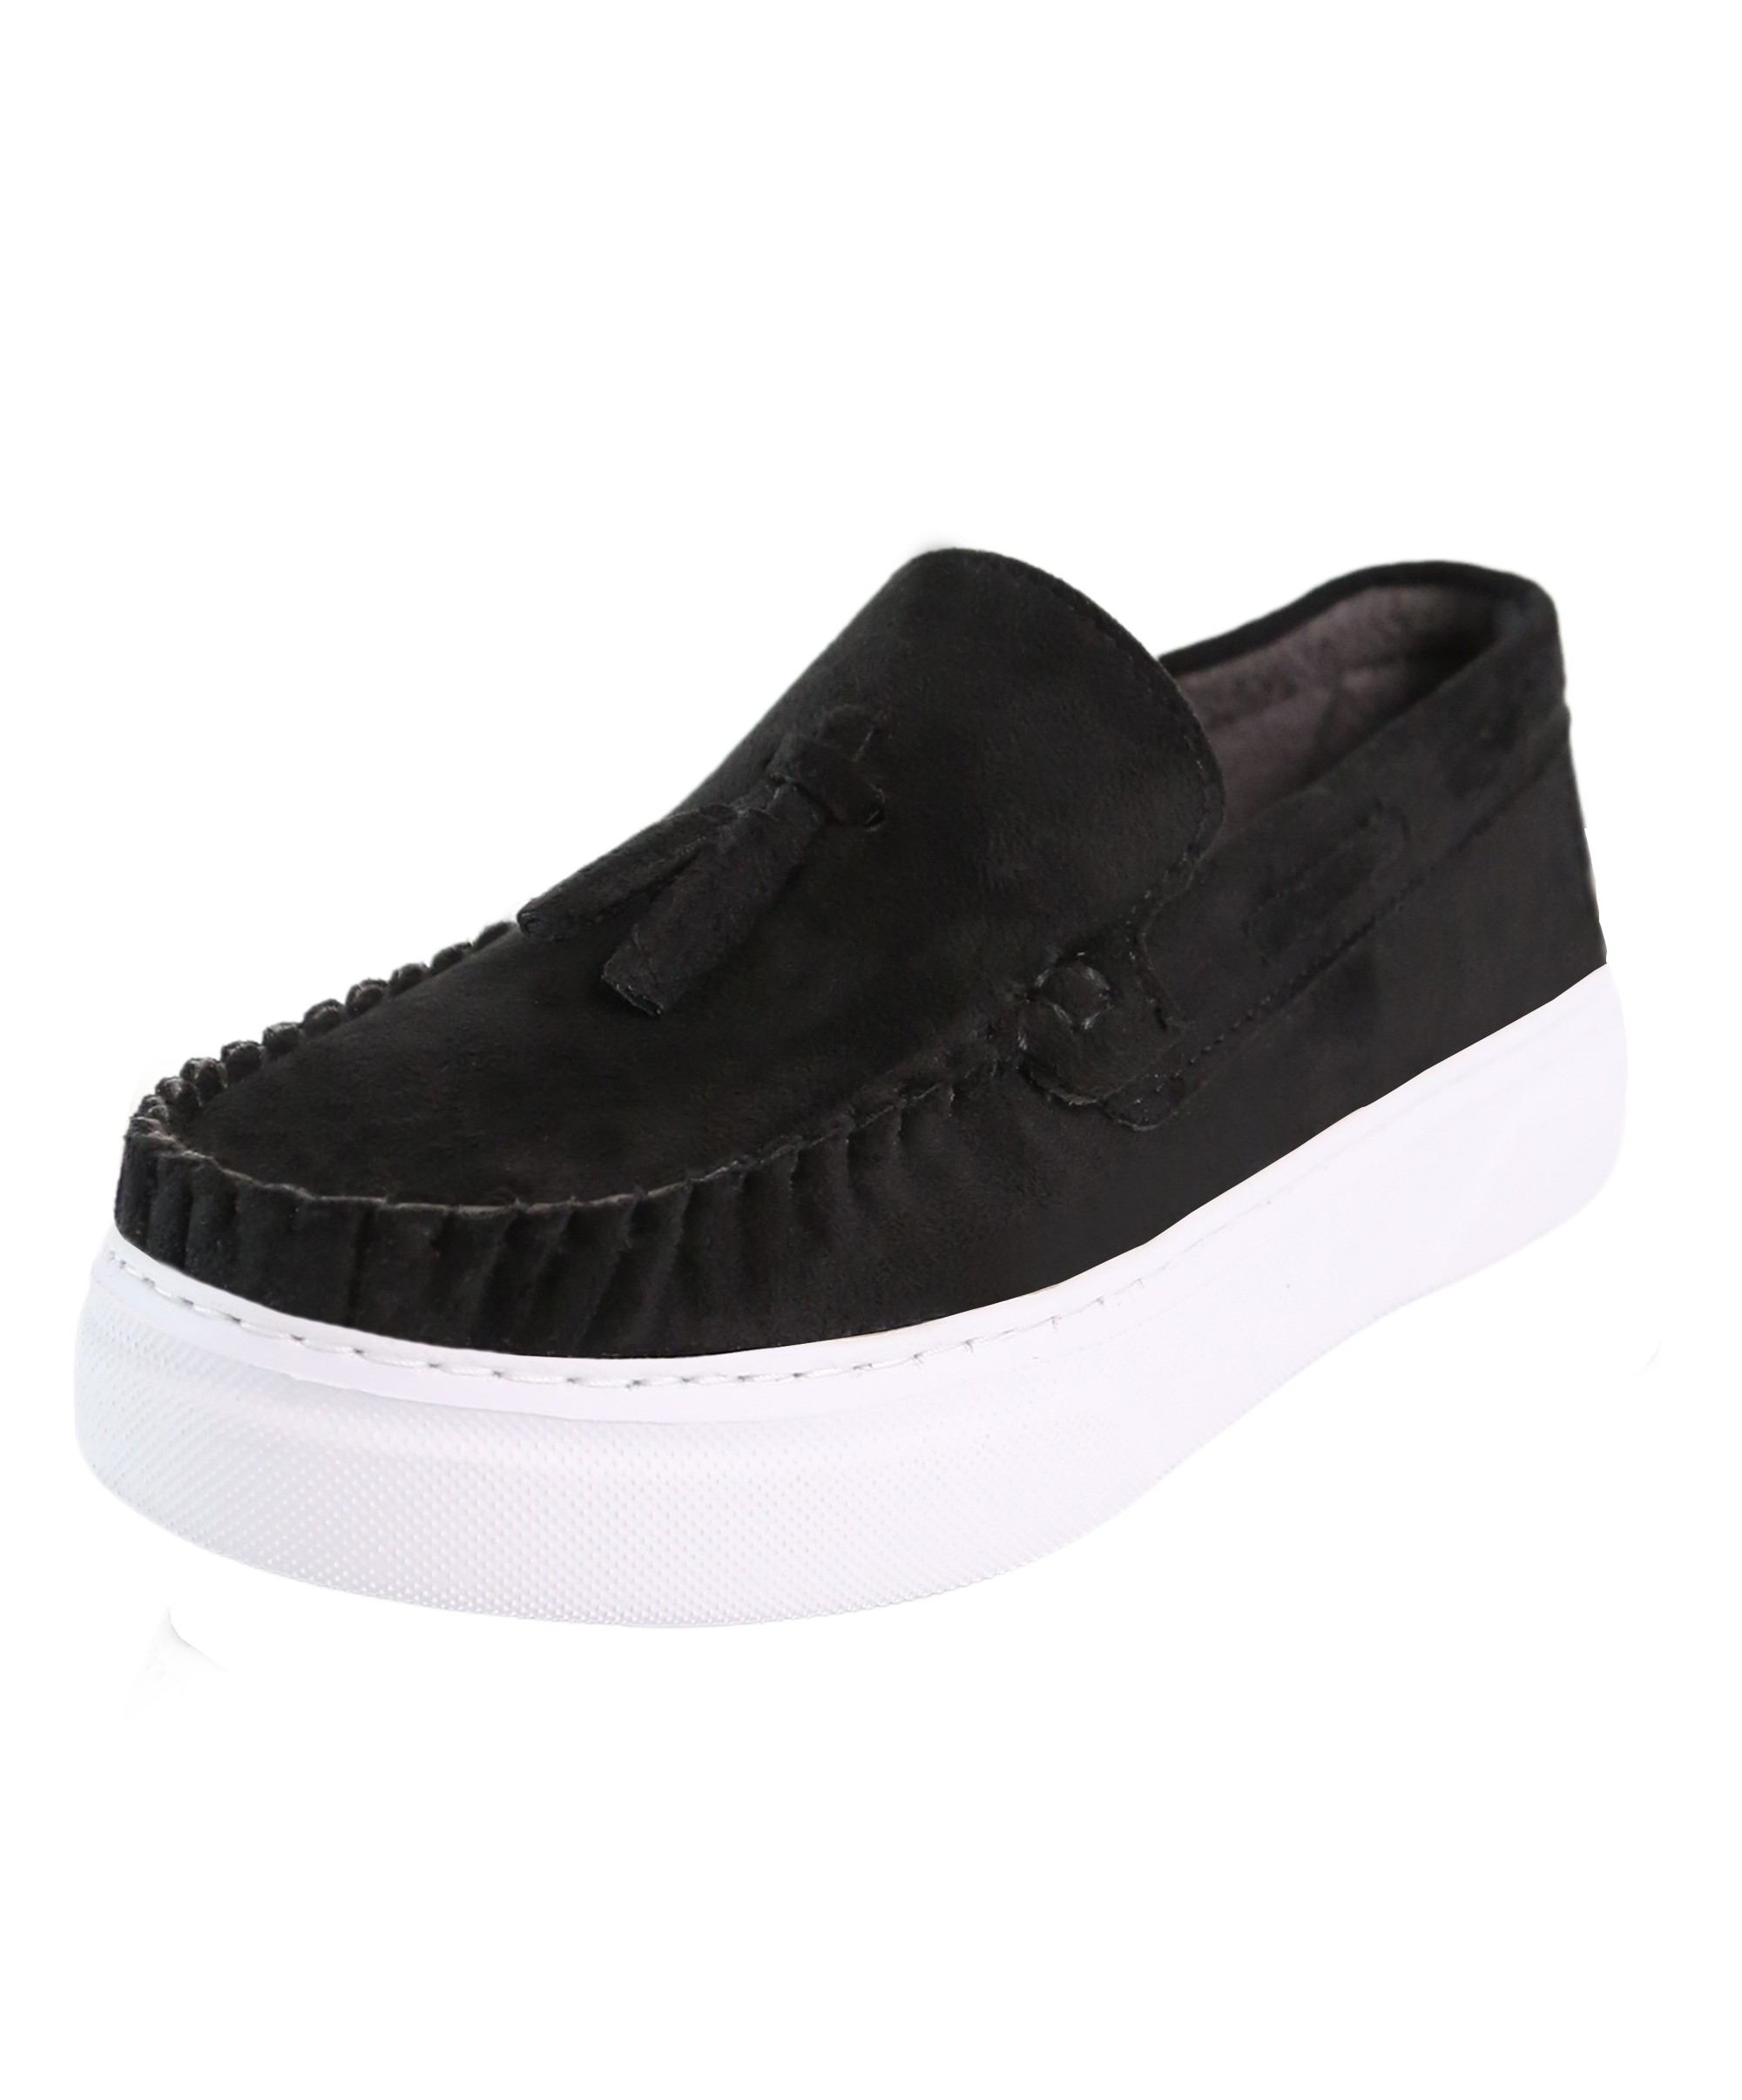 Boys Suede Slip-On Thick Sole Loafers - URBAN